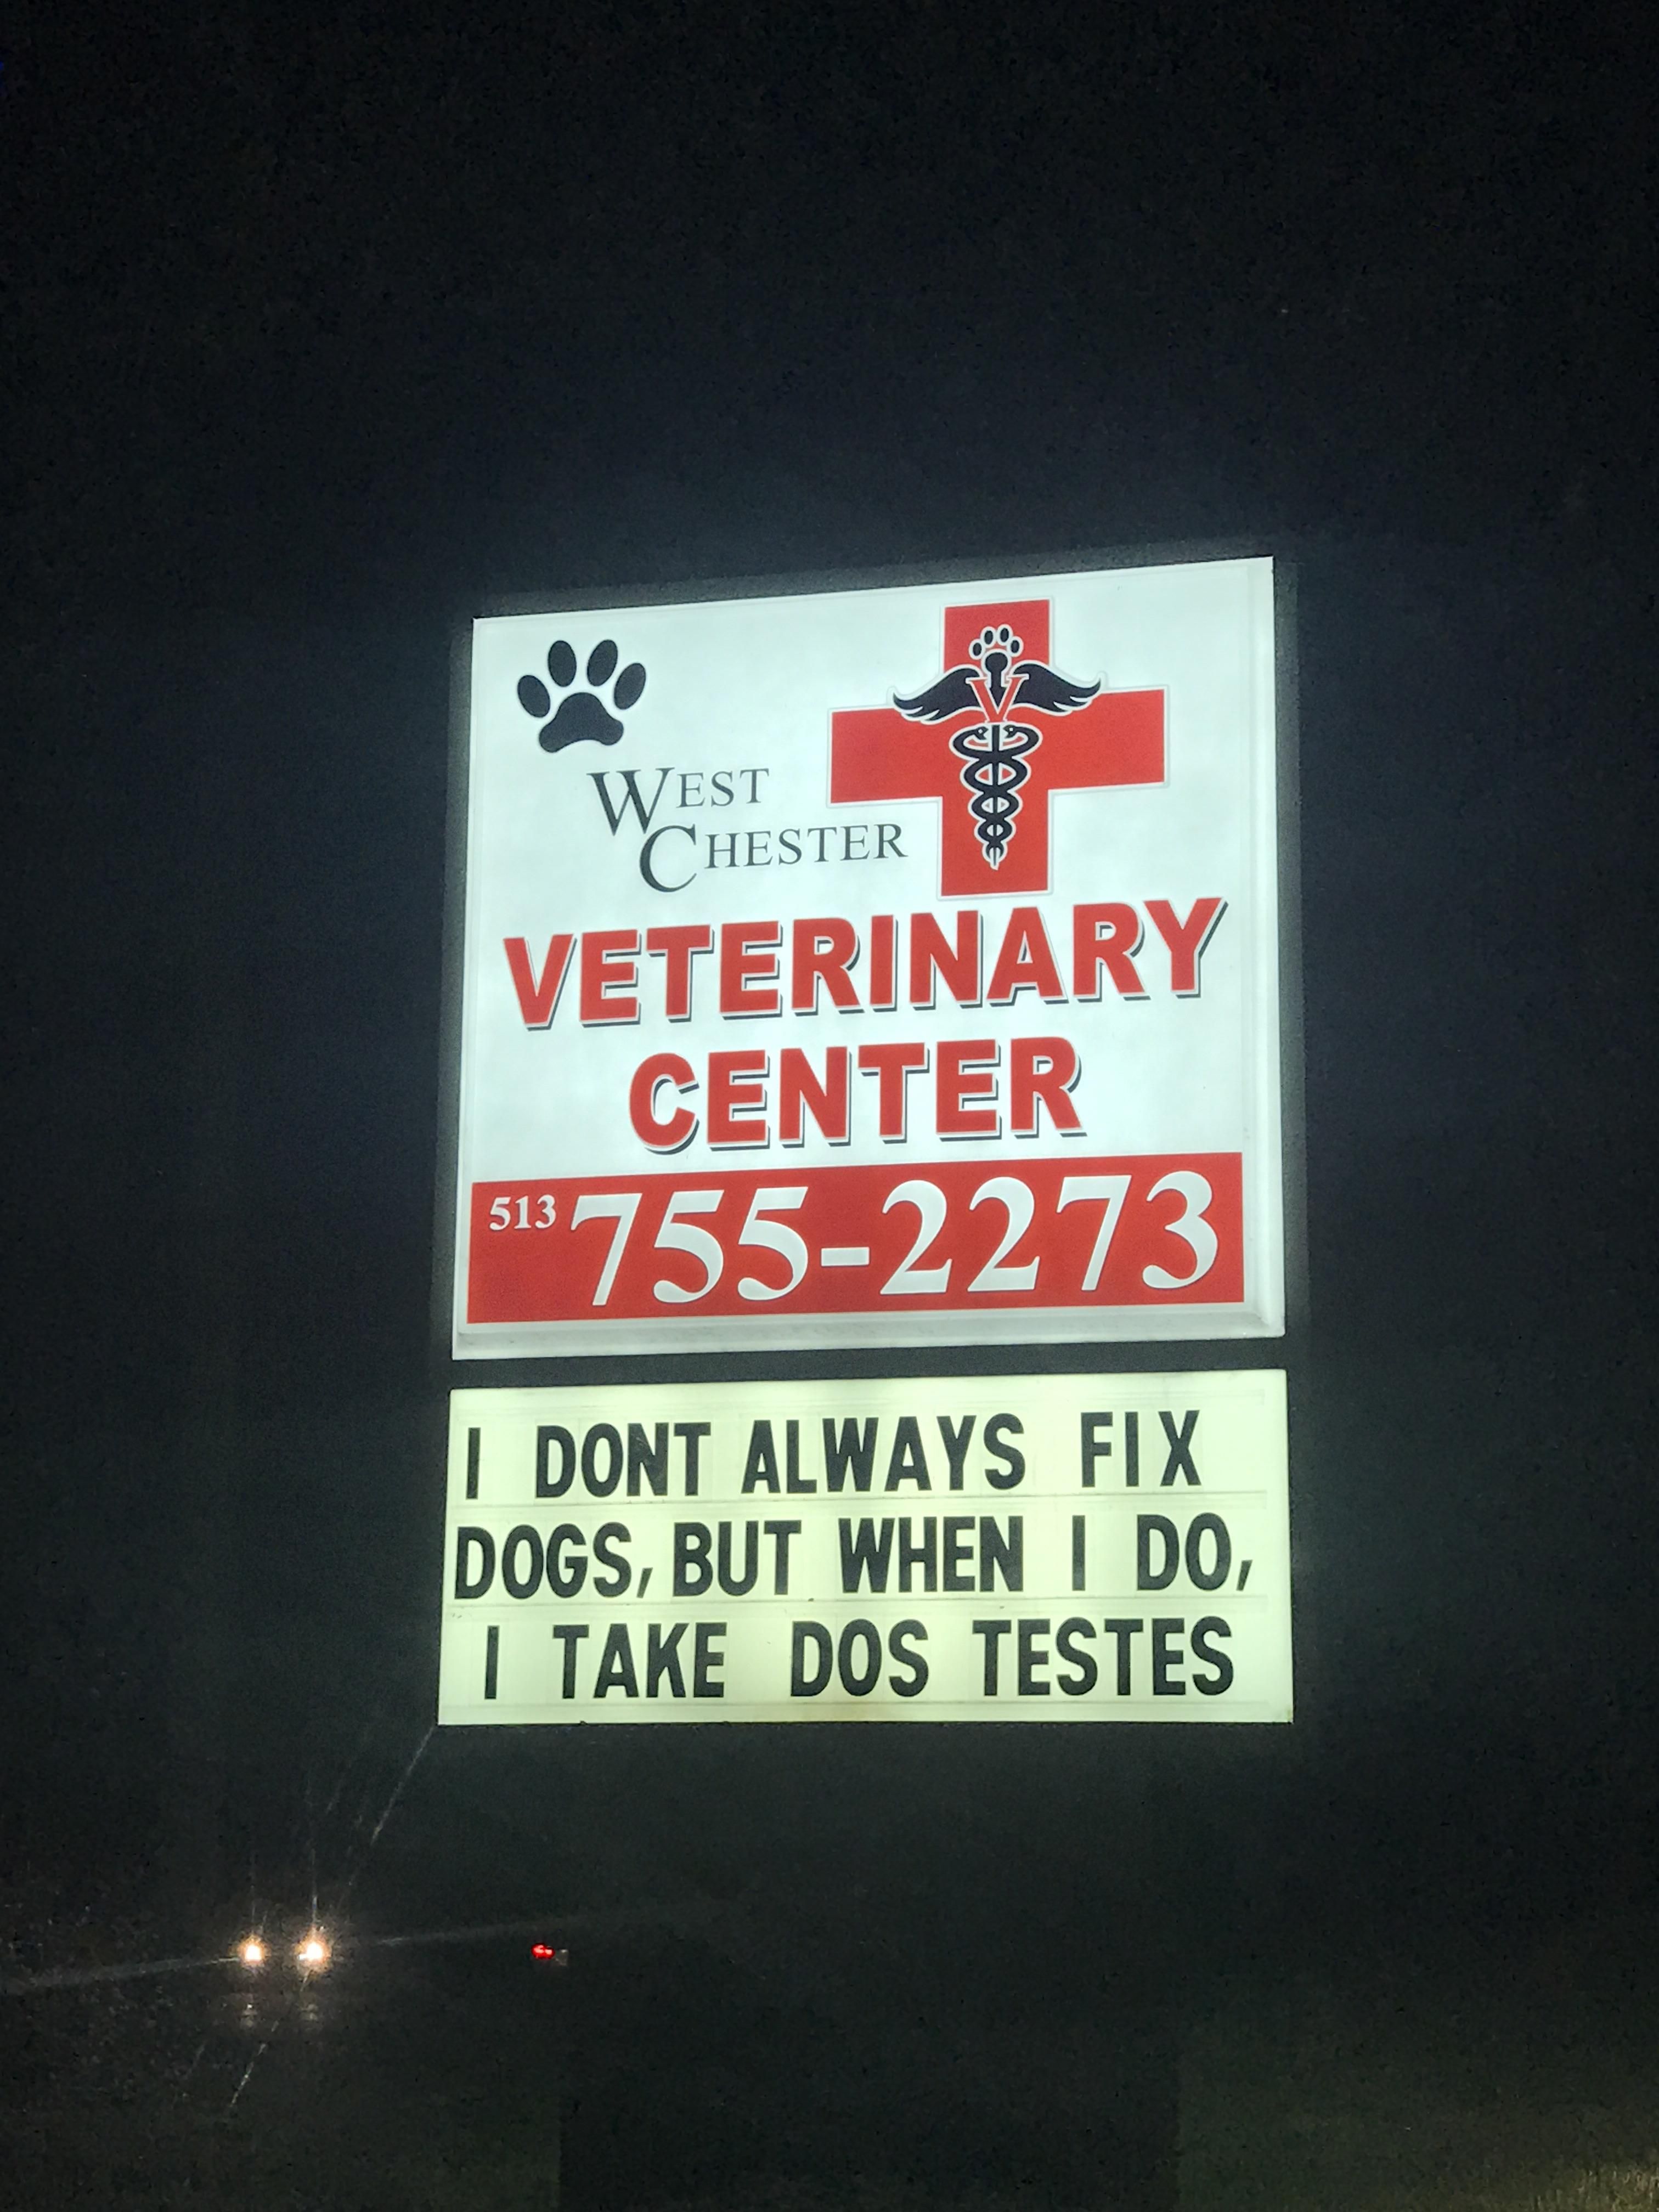 The most interesting vet in the world